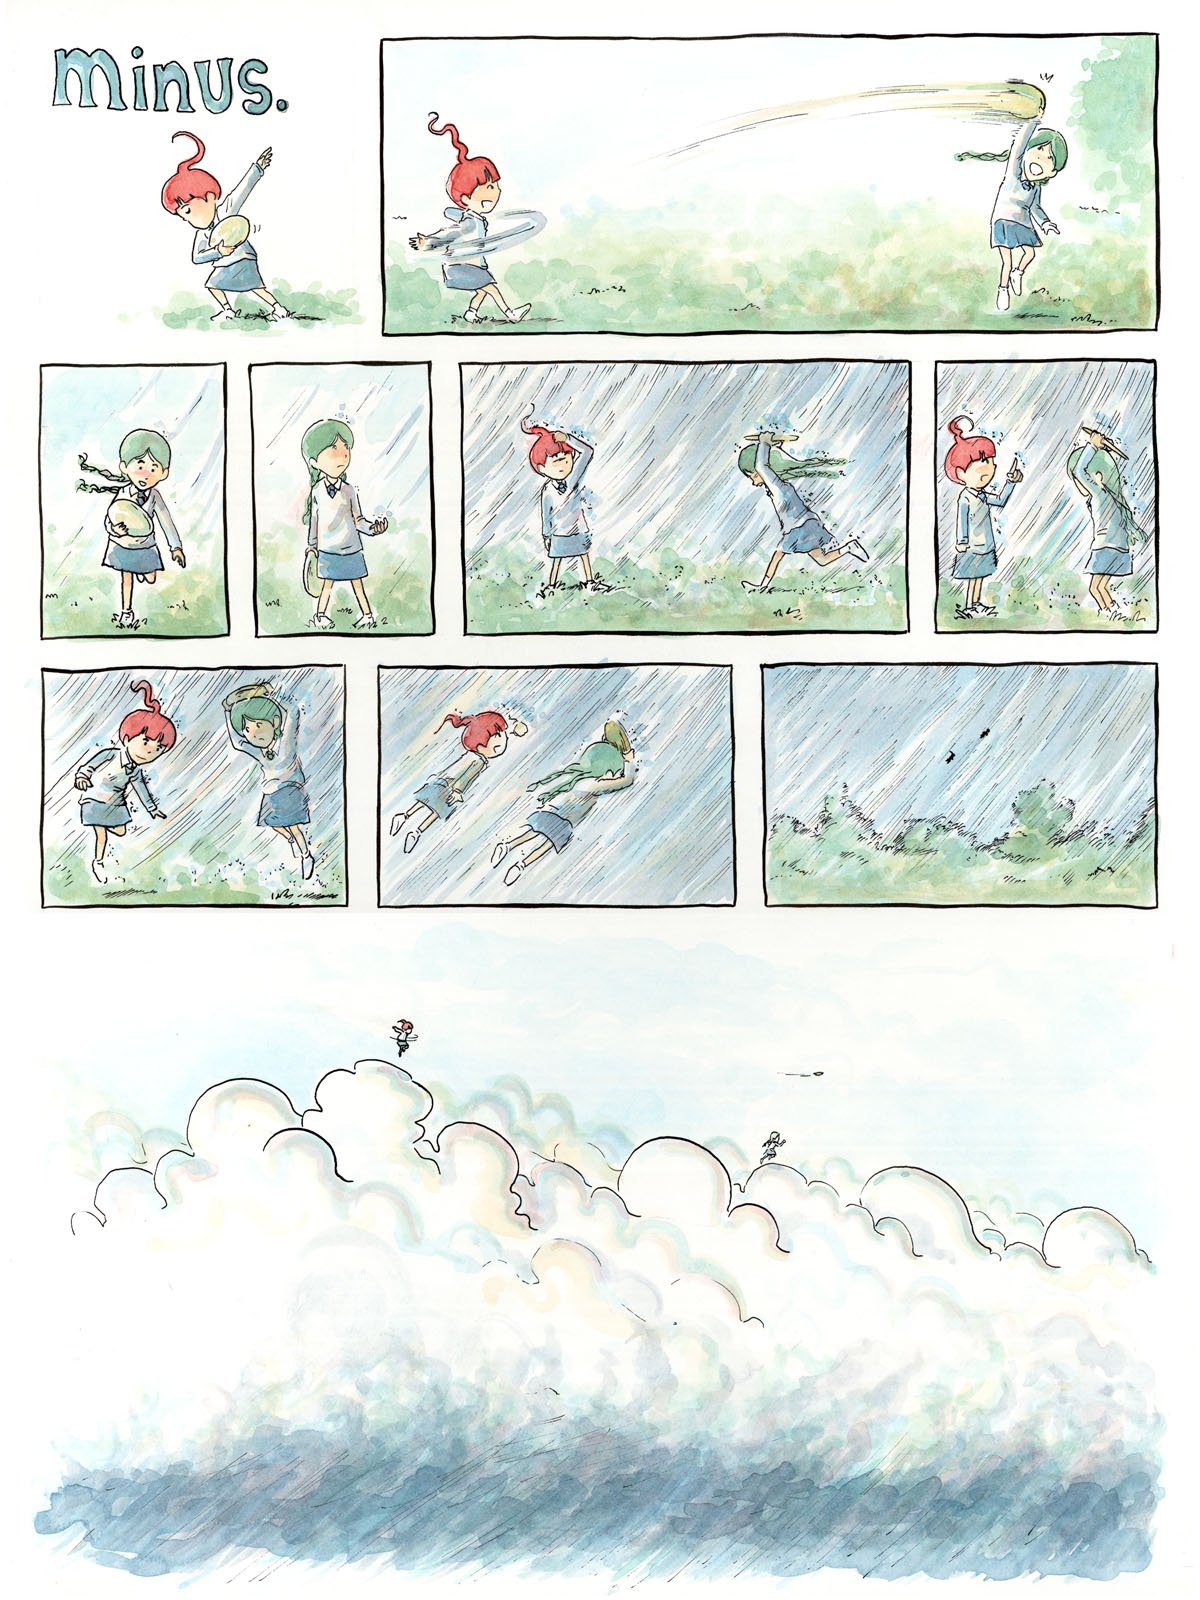 Comic strip. Transcription. Title: "minus." minus prepares to throw a frisbee. A girl jumps up to catch the frisbee. It begins to rain. The girl covers her head with the frisbee as she runs toward minus. minus talks to the girl, pointing a finger to the sky. minus points to the ground as she and the girl begin to levitate. They fly through the sky, going against the direction of the rain, the girl still using the frisbee to shield herself from the drops, and minus using her arm. They fly higher and higher, until they reach above the clouds. The two toss frisbees while flying above the clouds.